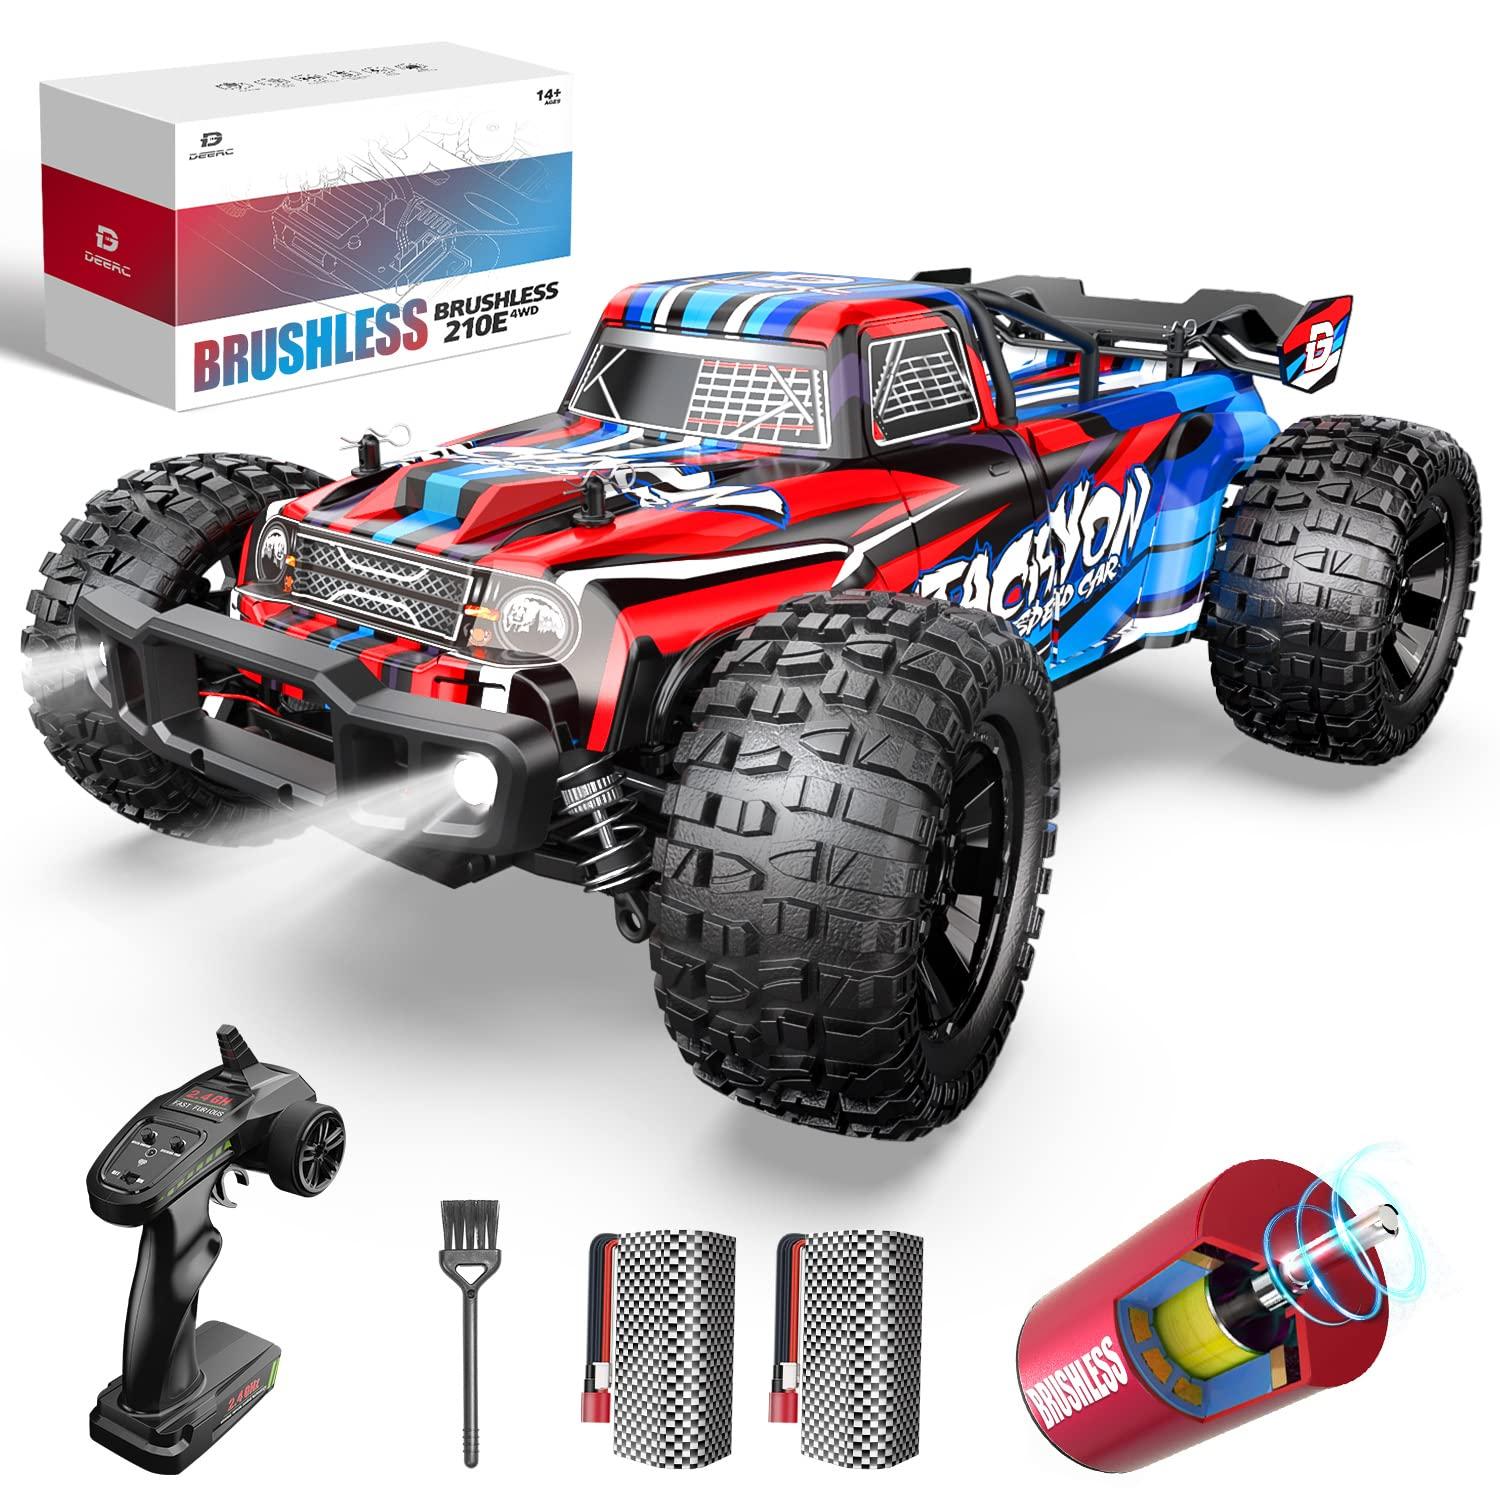 Xinlehong Q901: Durable construction and excellent traction make the Q901 an ideal choice for adventurous RC car drivers.